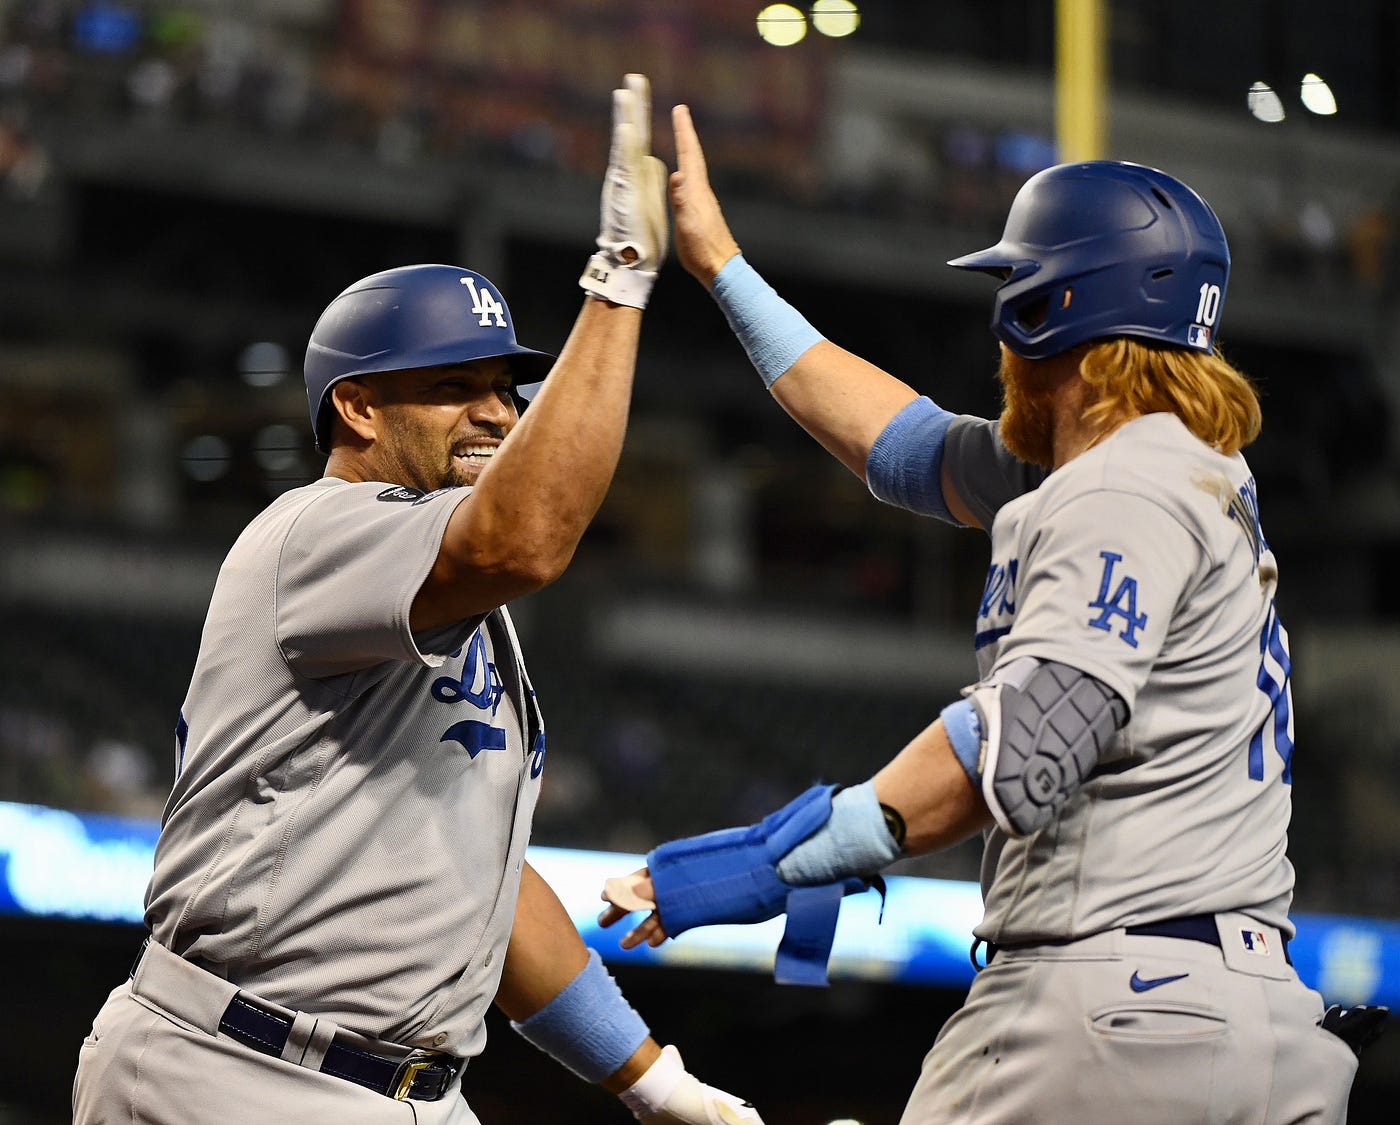 Pujols continues his surge vs. lefties as Dodgers hold on to sweep